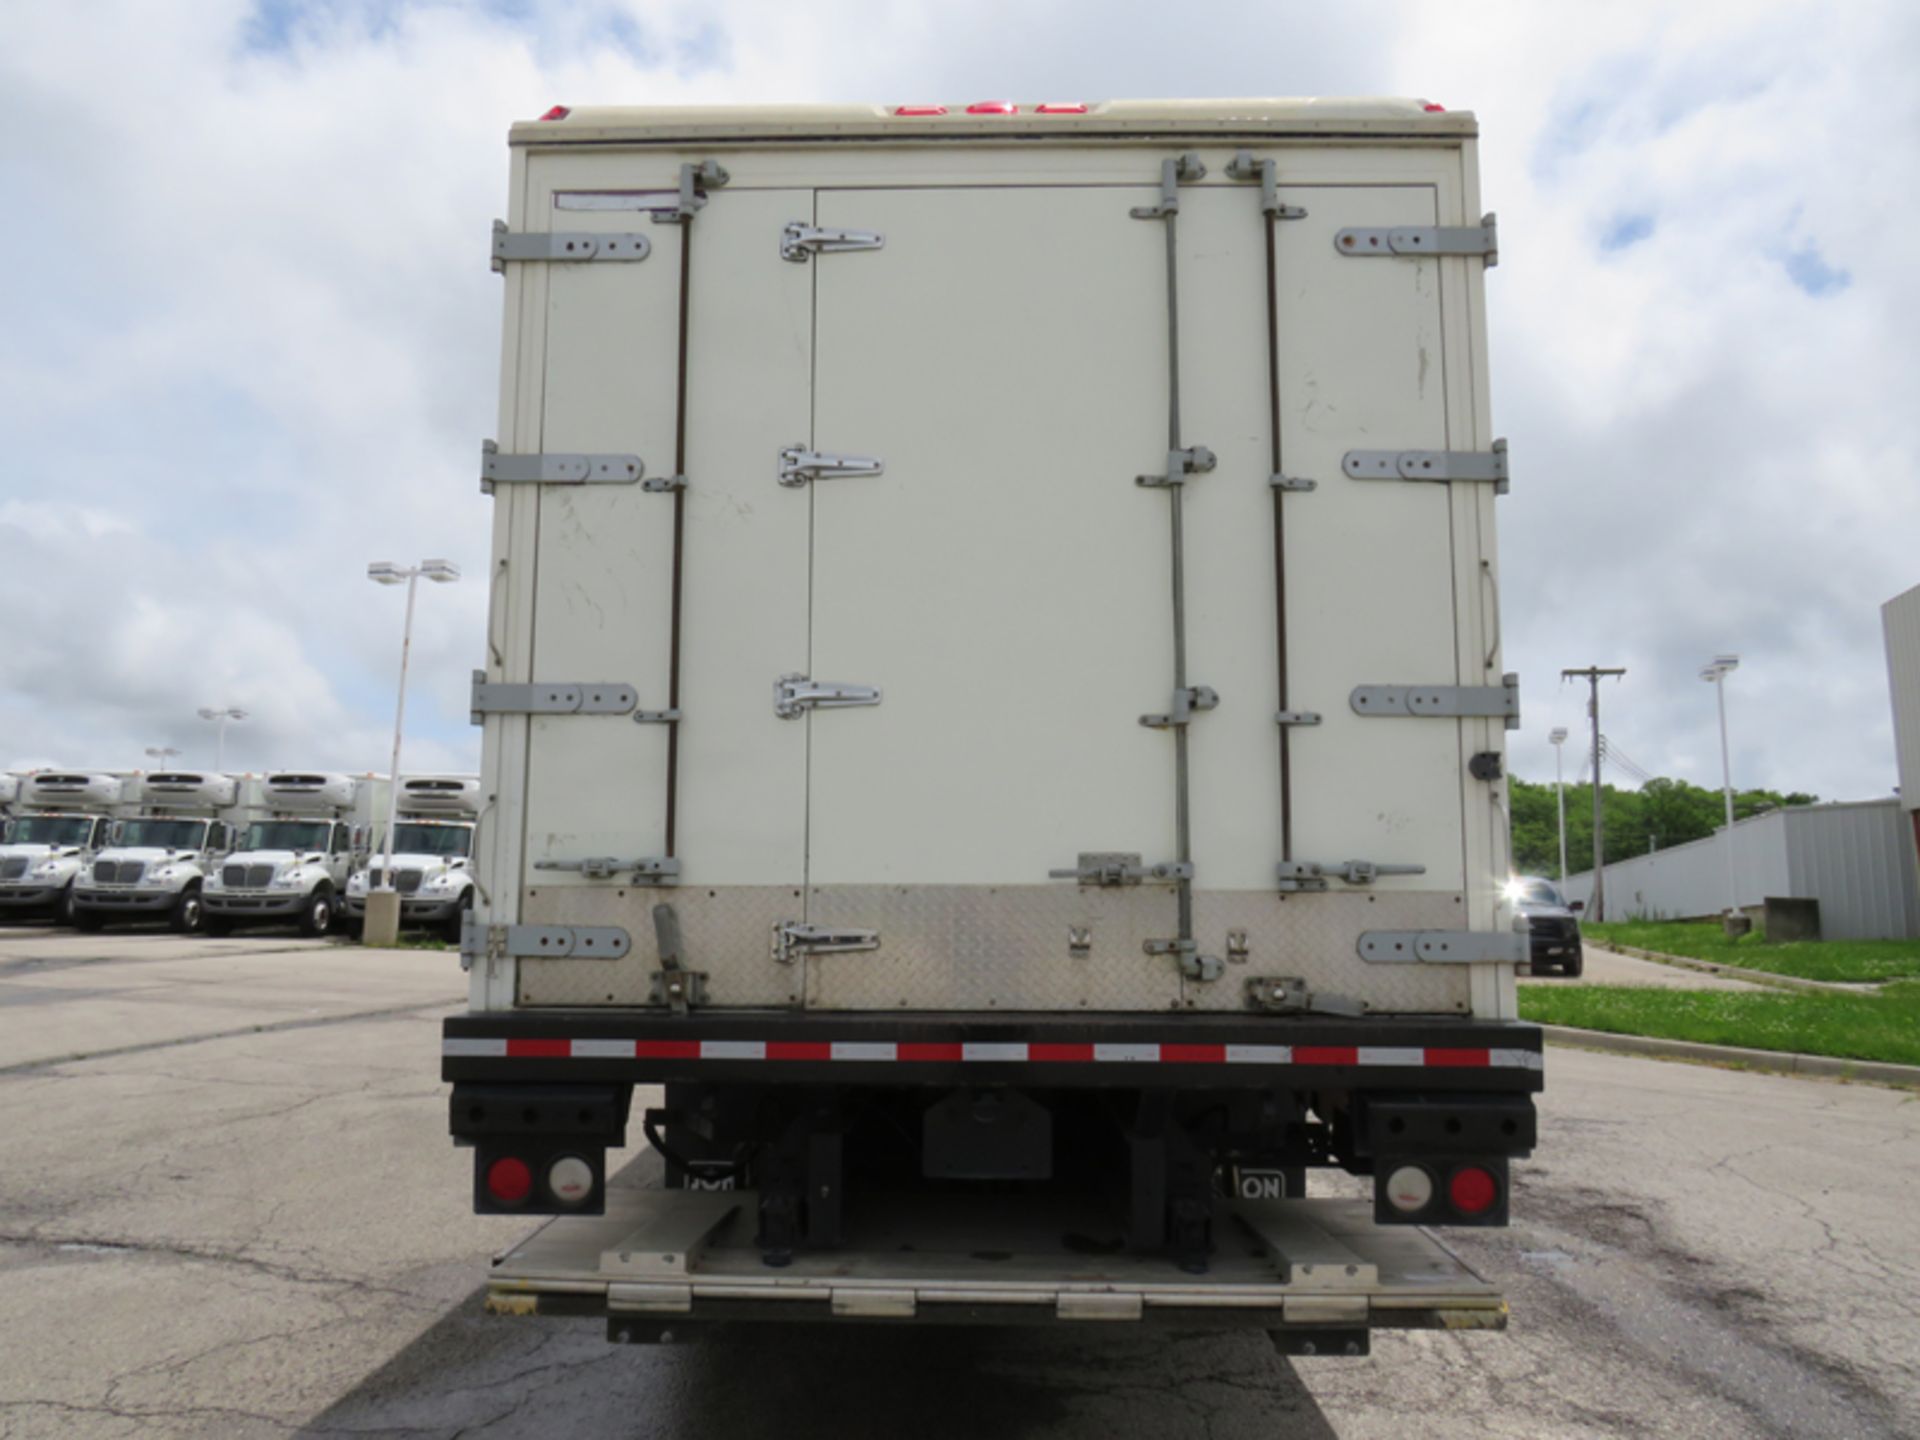 2018 INTERNATIONAL 4400 SBA 6X4 REFRIGERATED BOX TRUCK VIN#: 1HTMSTAR2JH048955, Approx Miles: 44630, - Image 4 of 9